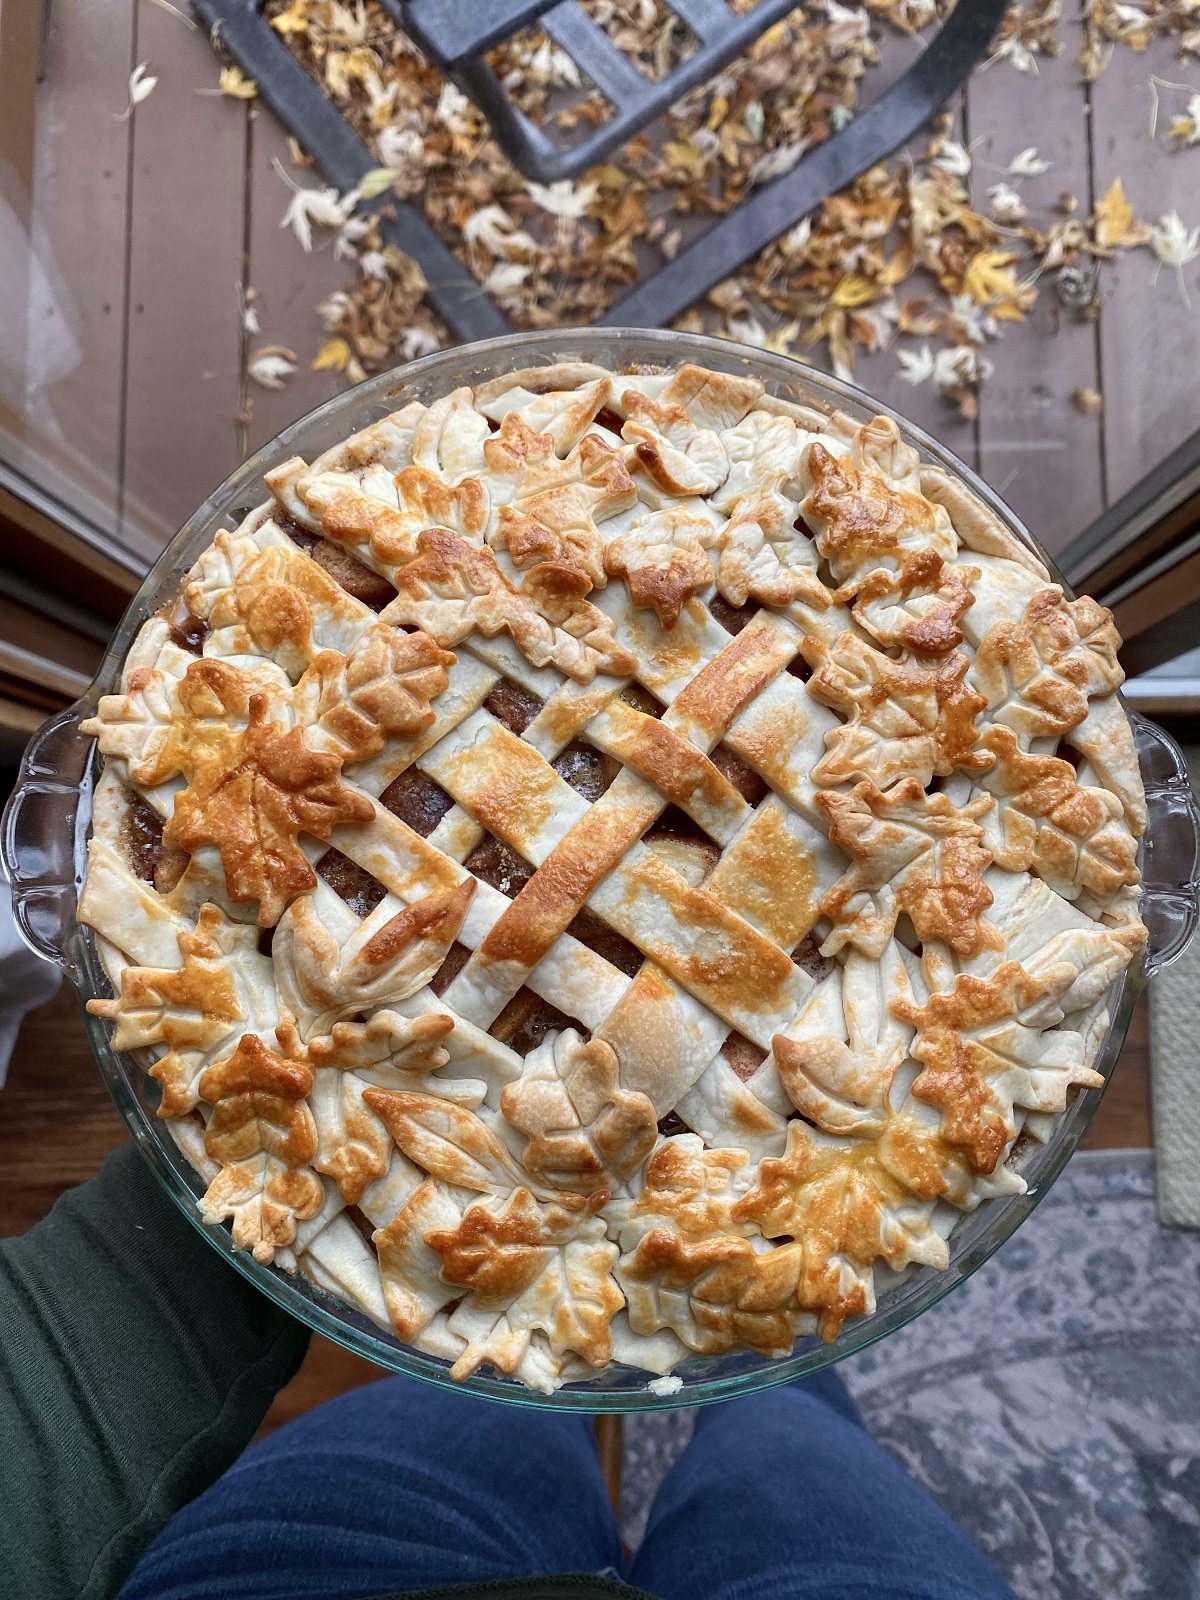 I Made An Extra Pretty Apple Pie Because They're In Season, And I Wanted To Try Out My New Pie Pan